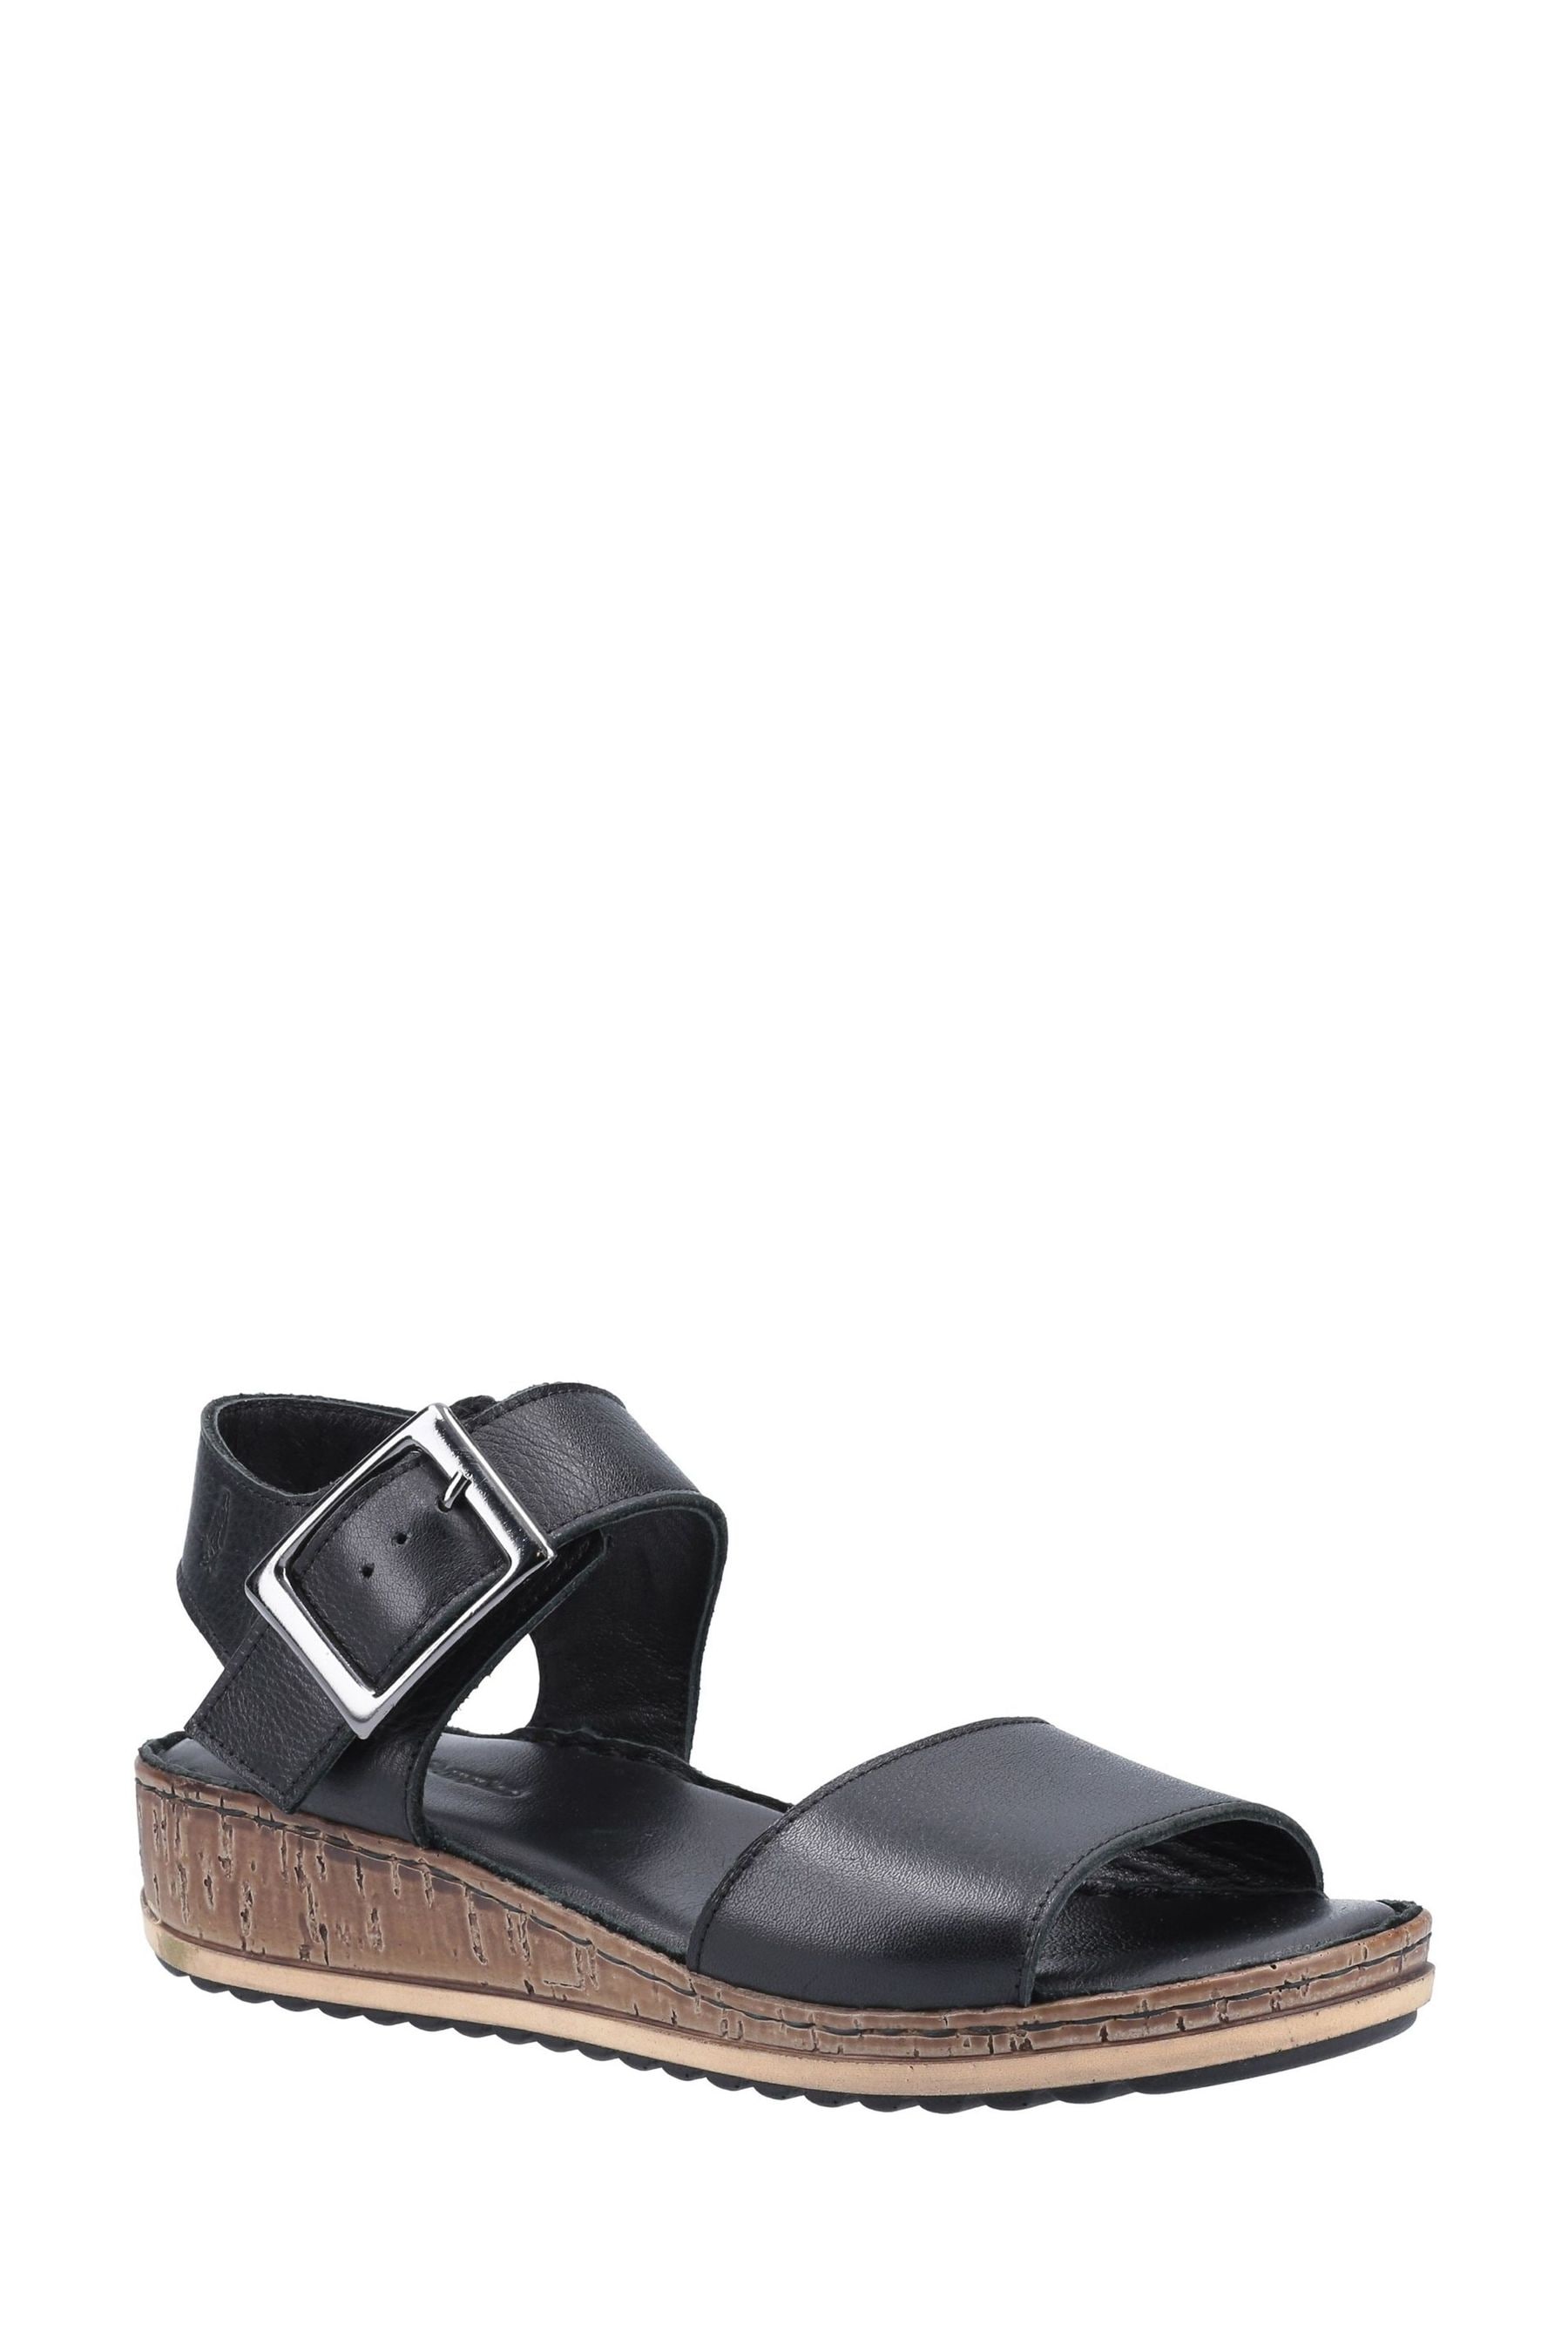 Buy Hush Puppies Black Ellie Heeled Sandals from the Next UK online shop